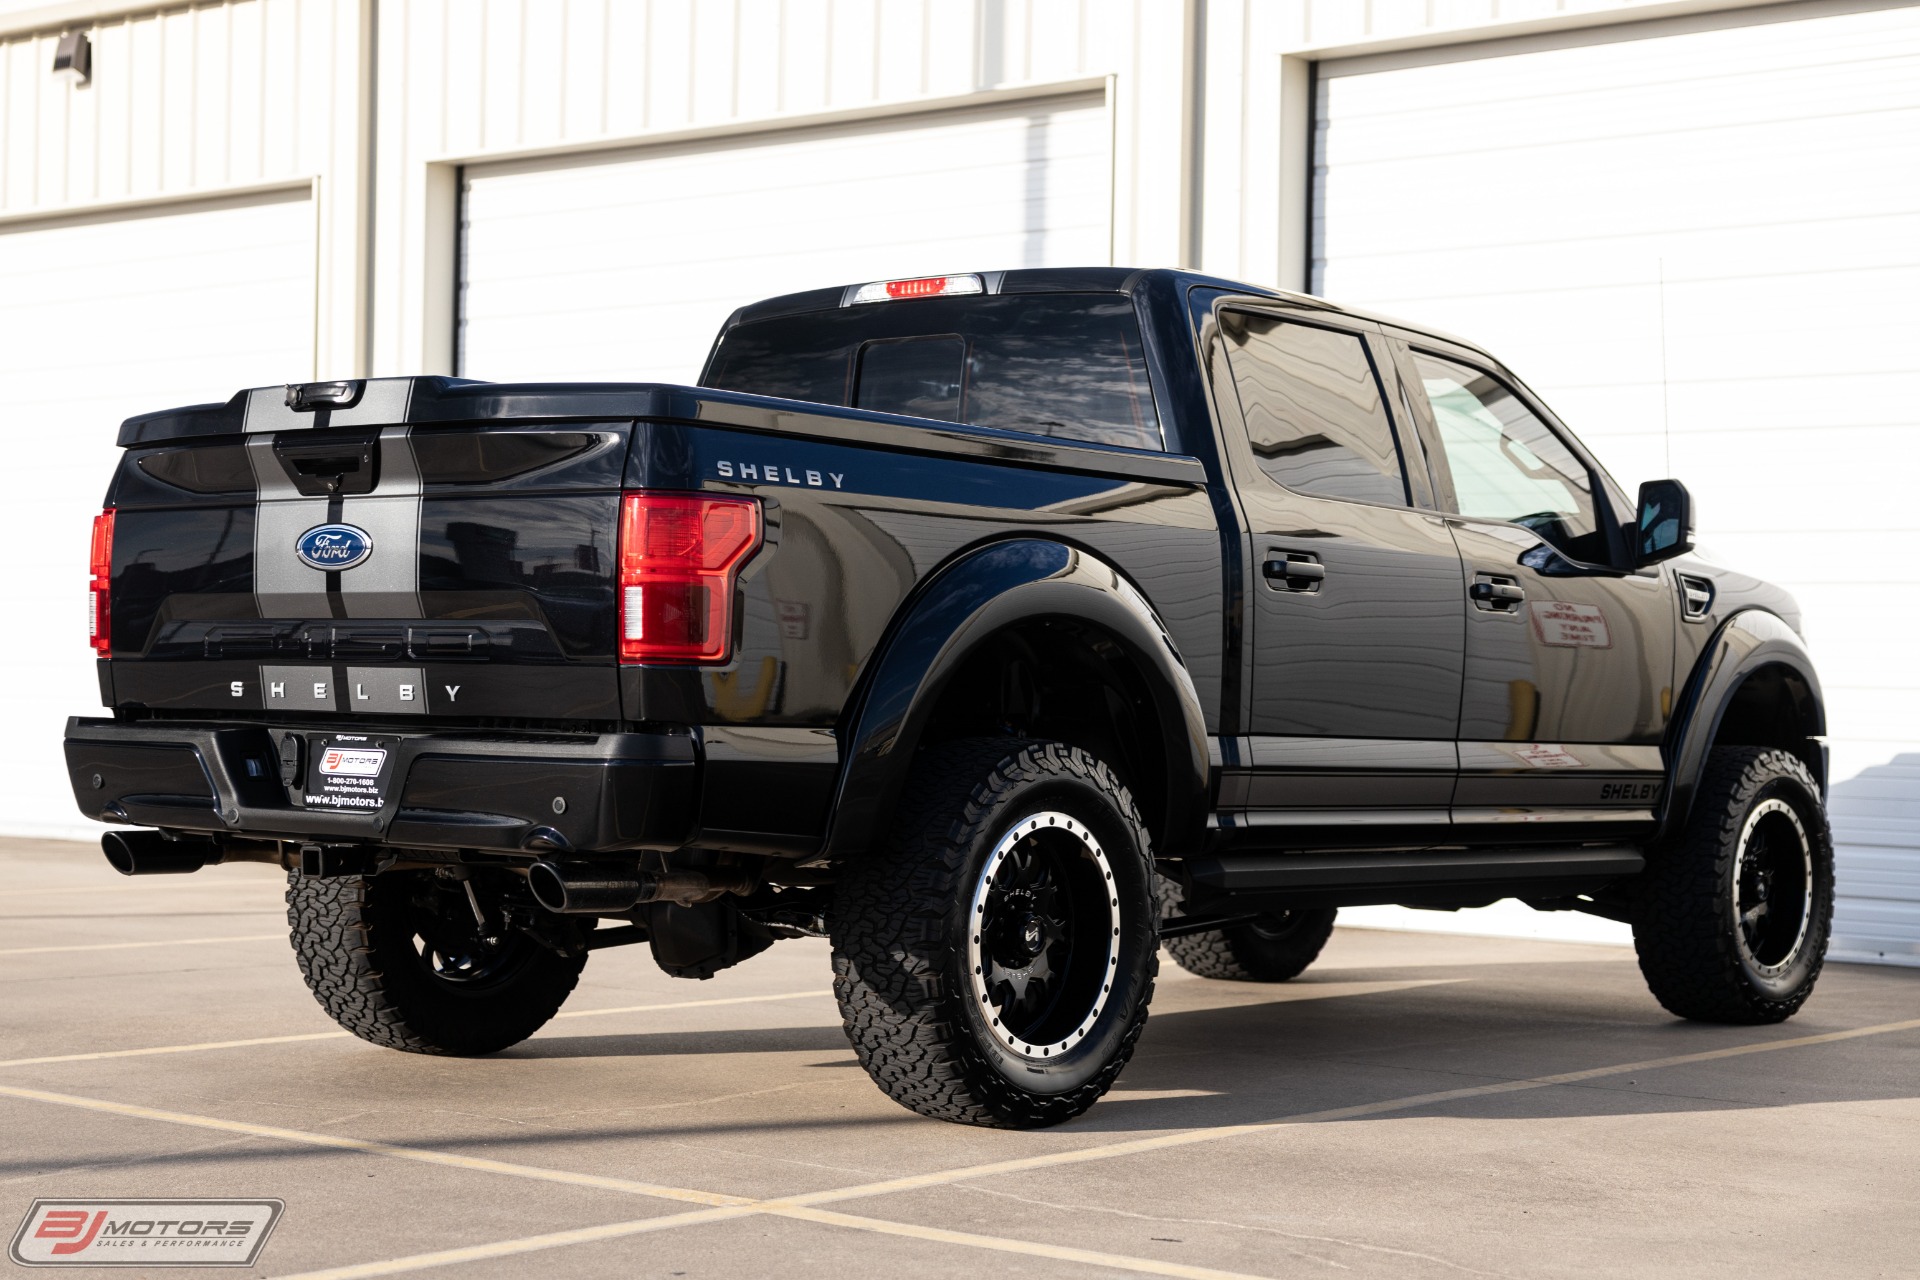 Used-2019-Ford-F-150-Shelby-Supercharged-755HP